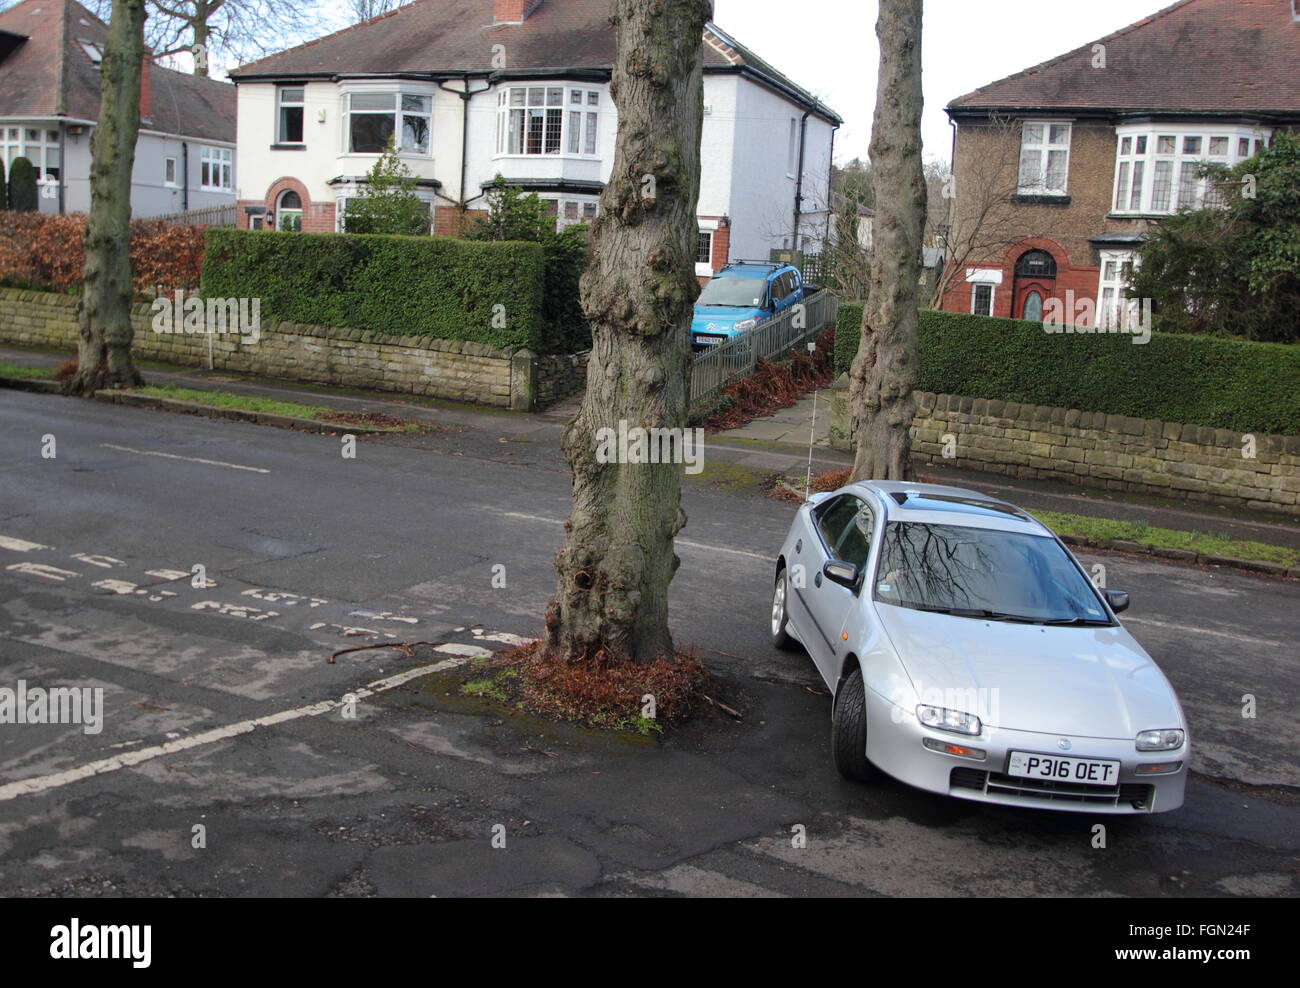 A car navigates a tree growing in the middle of a t-junction on a road in a leafy suburb of the city of Sheffield, England UK Stock Photo